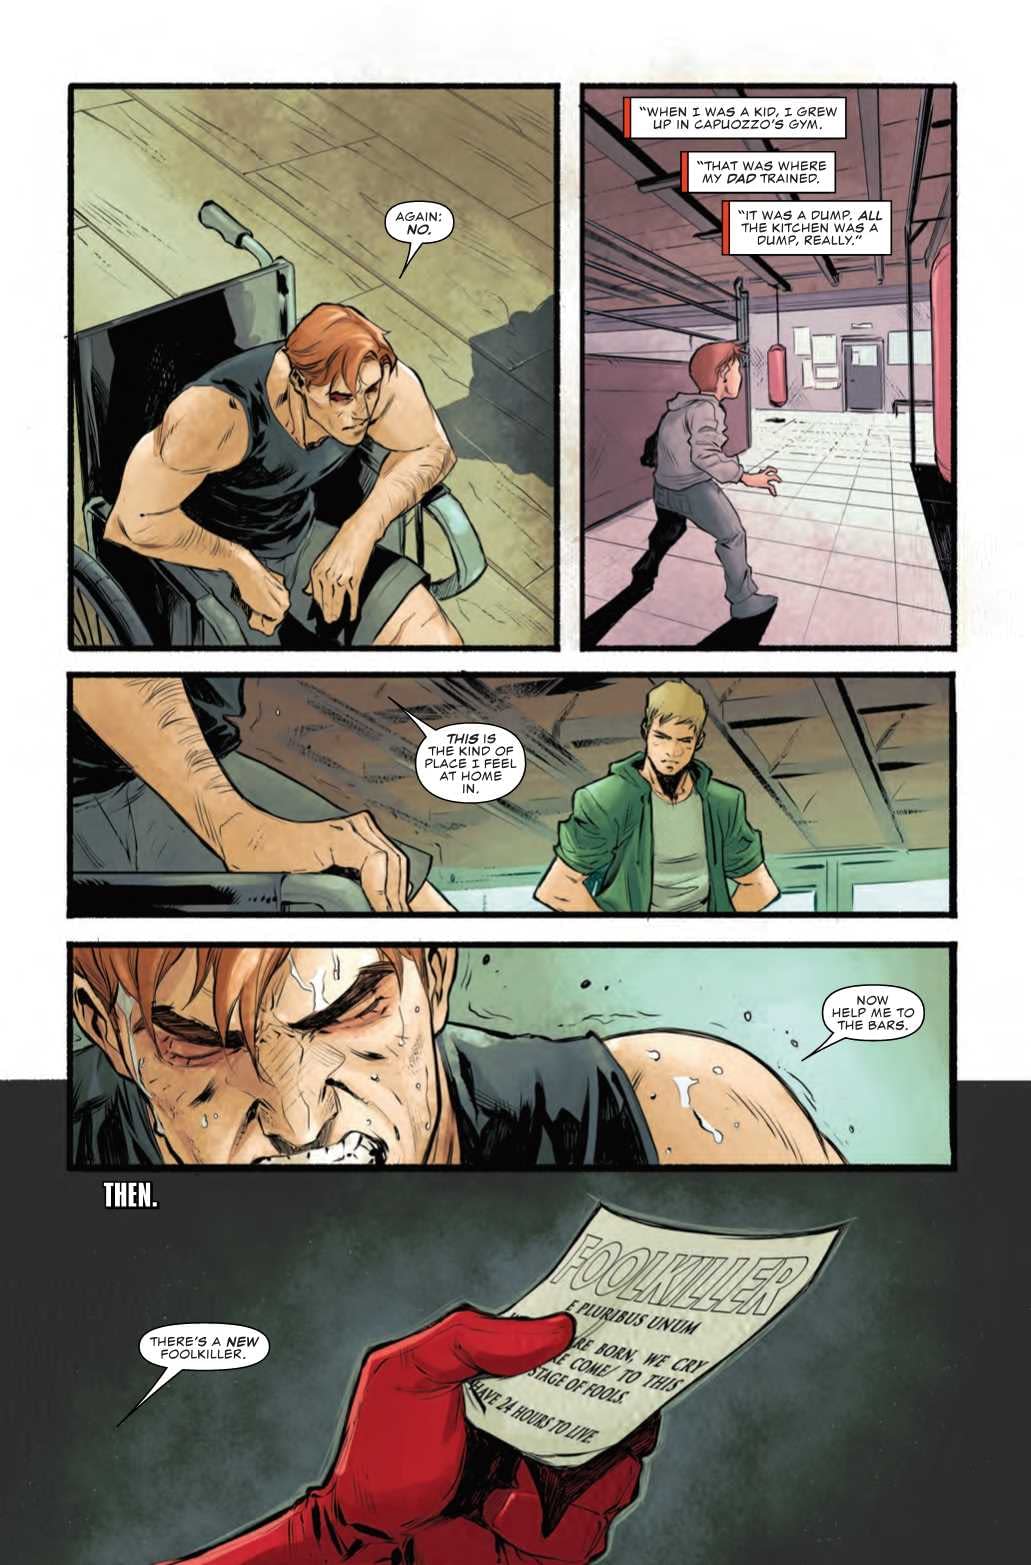 Iron Fist Advocates for Free Market Healthcare in Next Week's Man Without Fear #3